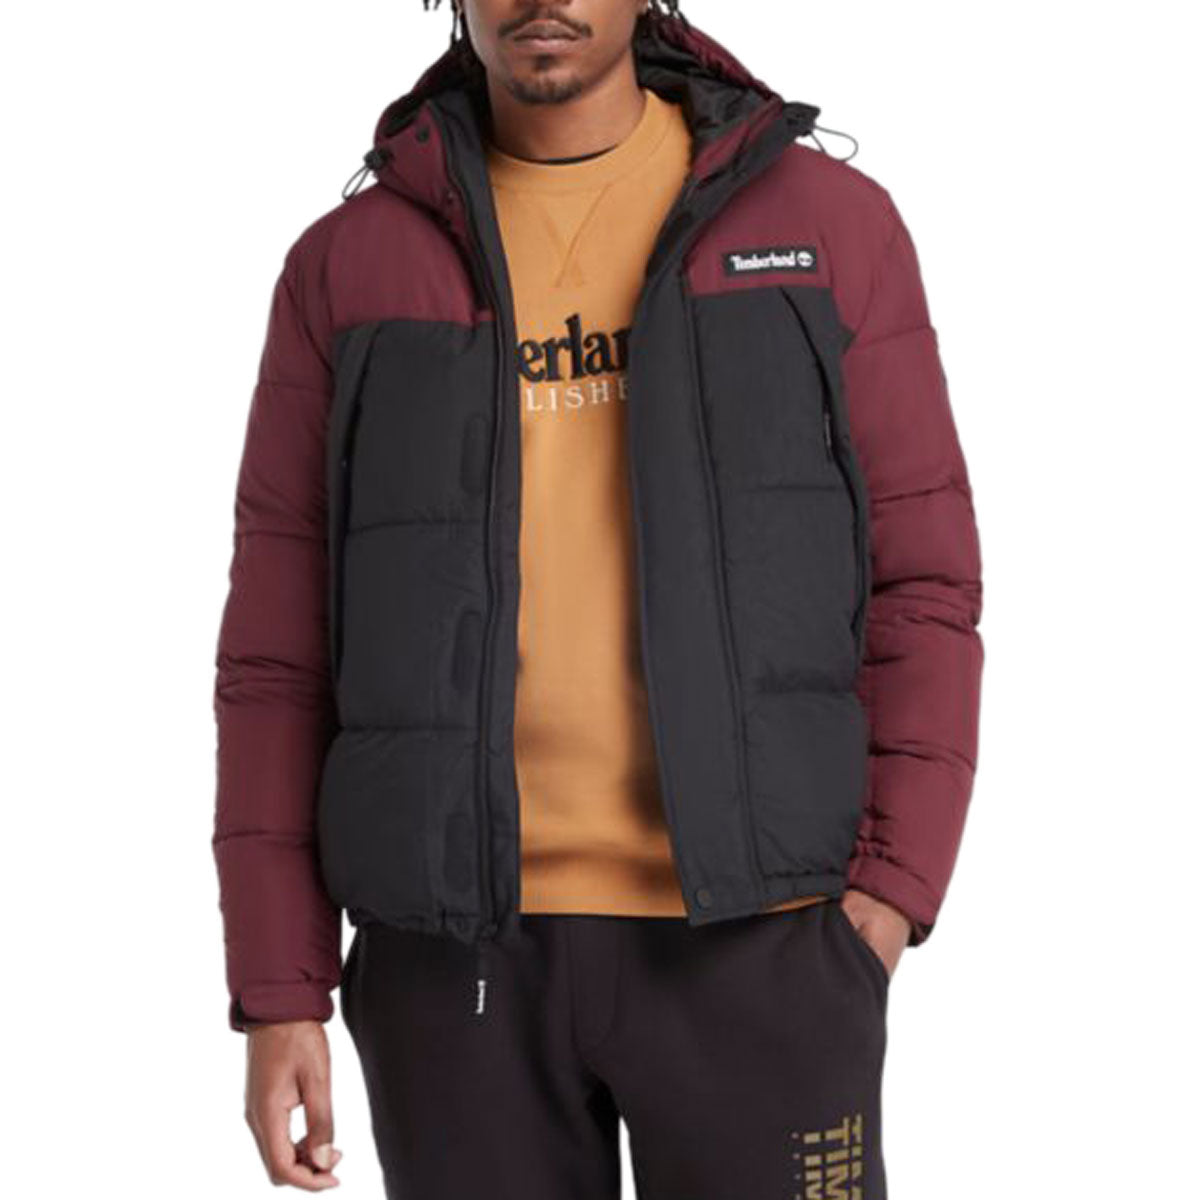 Timberland DWR Outdoor Archive Puffer Jacket - Port Royale/Black image 1